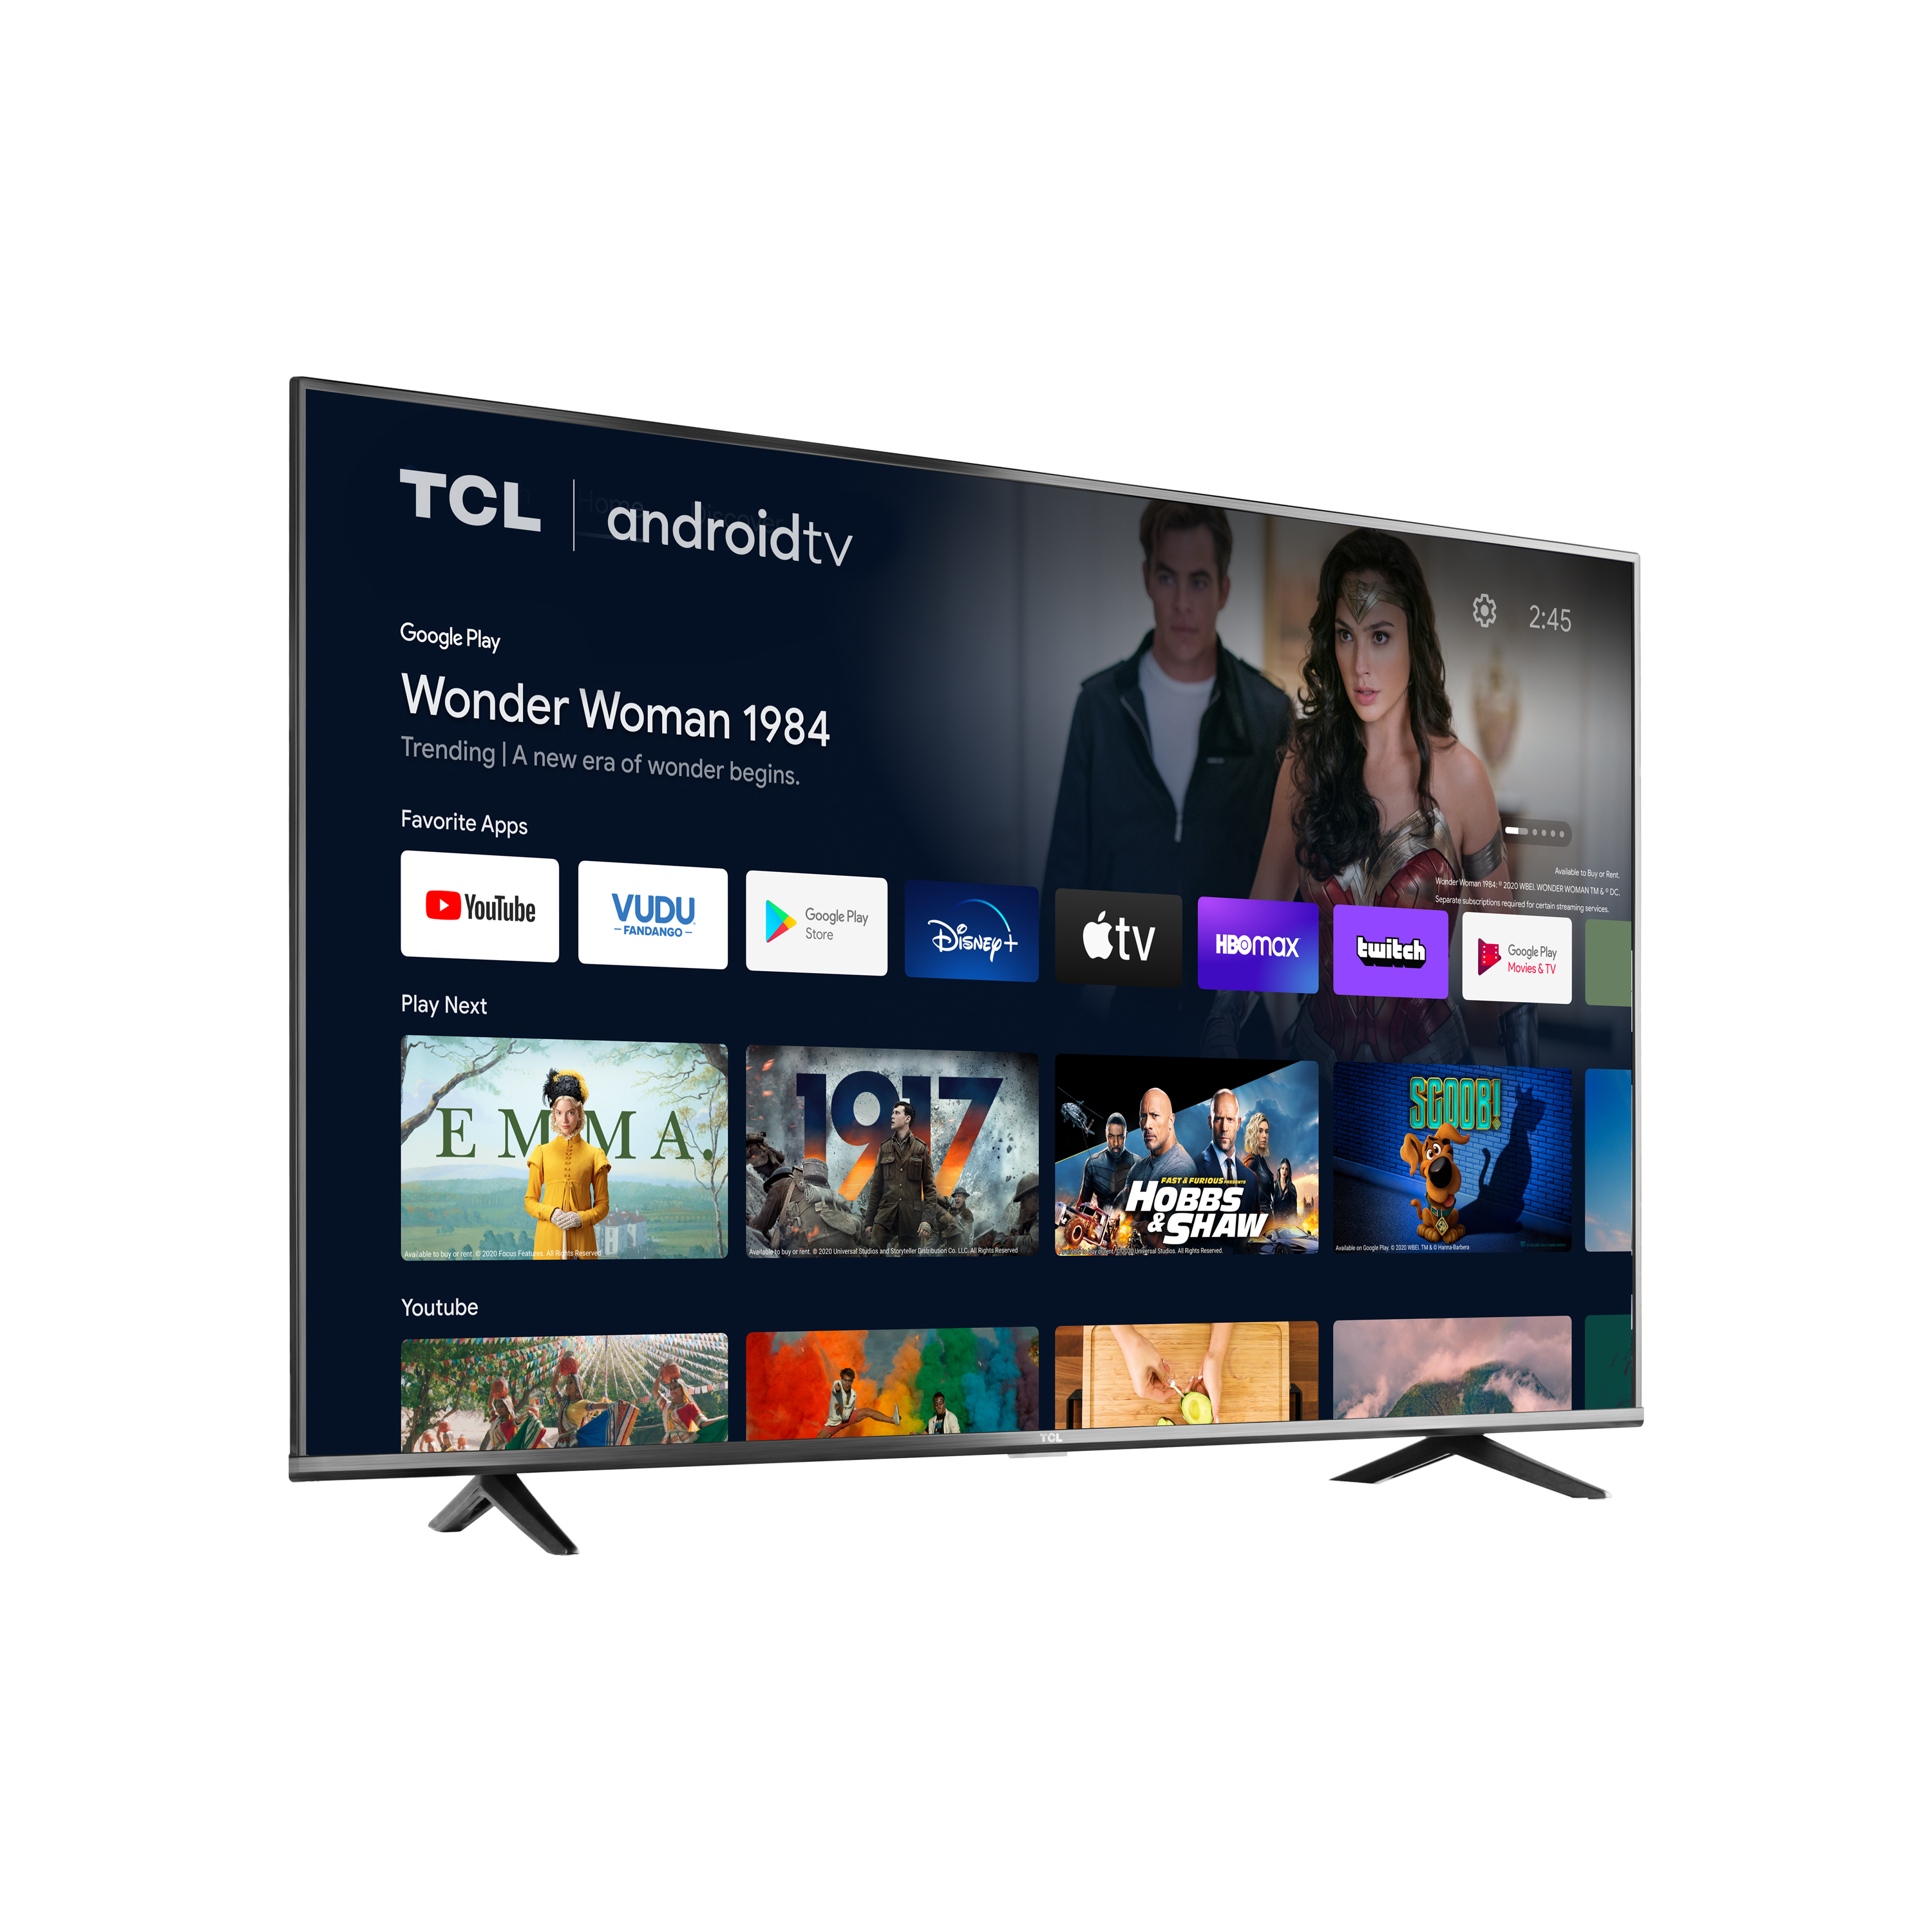 TCL 55" Class 4-Series 4K UHD HDR Smart Android TV - 55S434 - image 3 of 11